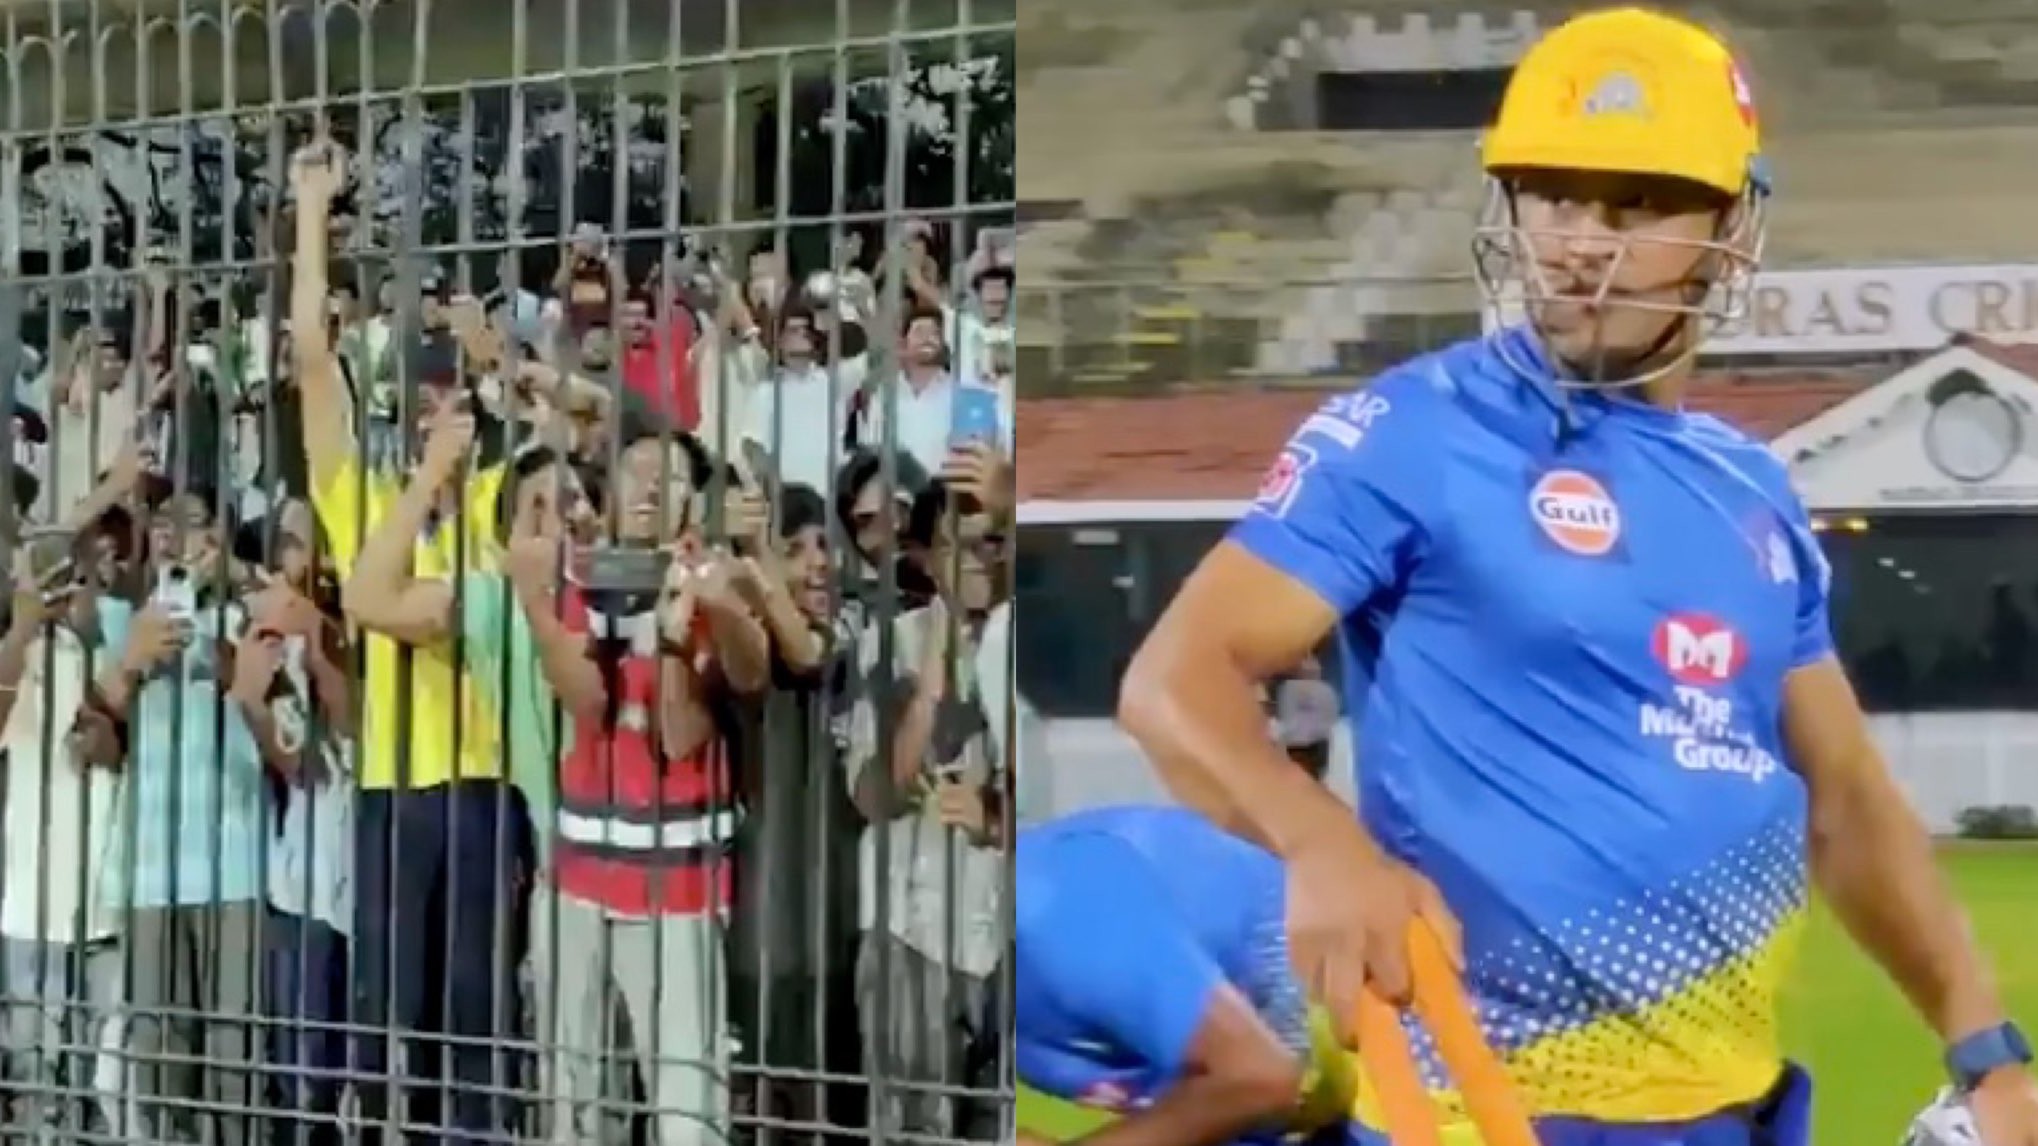 IPL 2020: WATCH - Fans come in huge numbers to watch MS Dhoni bat in the Chepauk nets